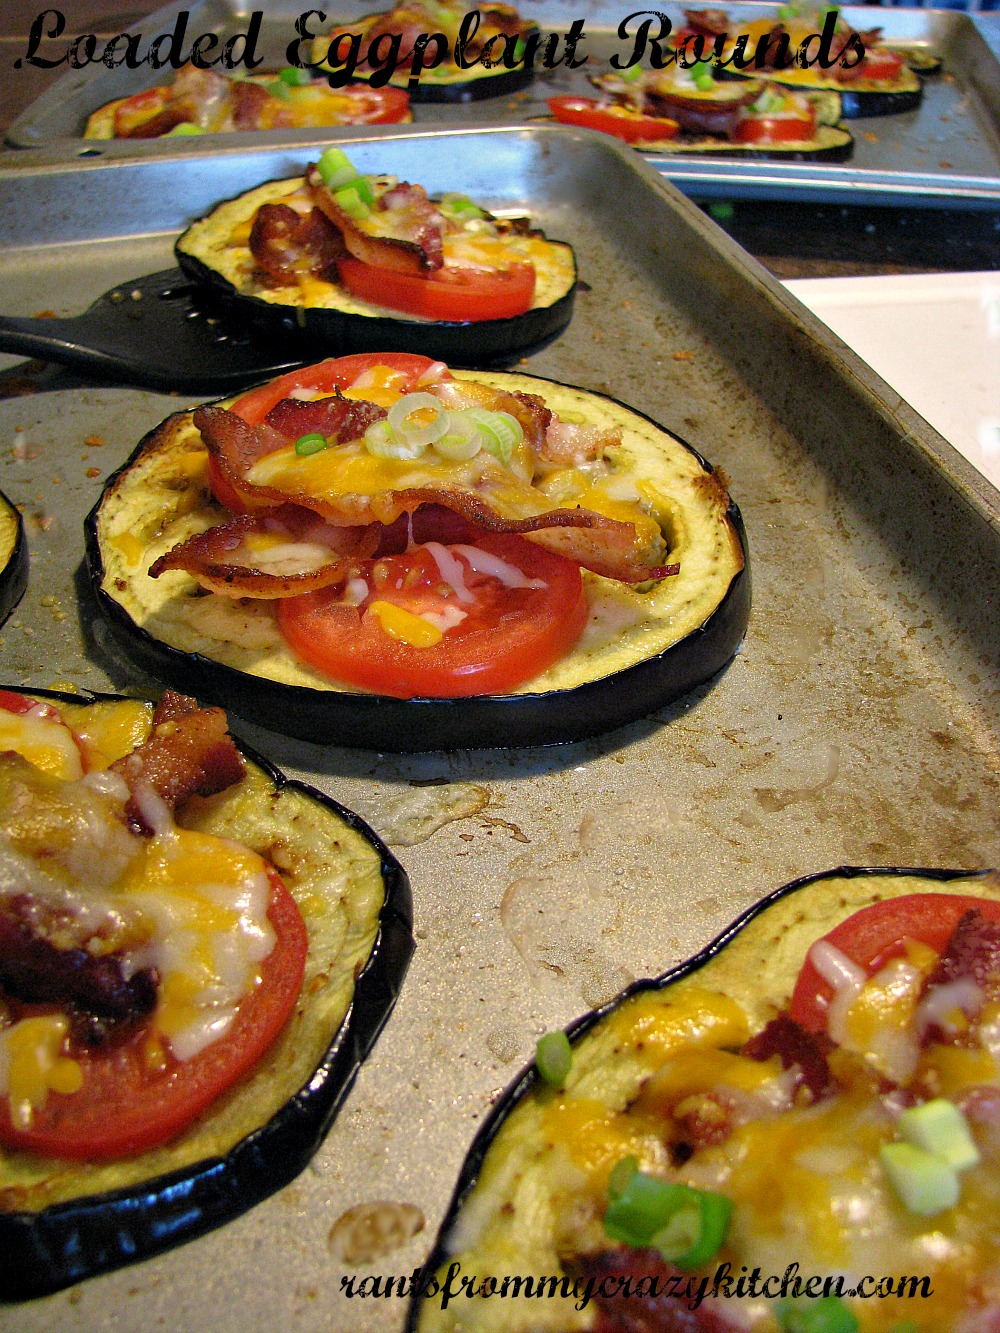 Loaded Eggplant Rounds